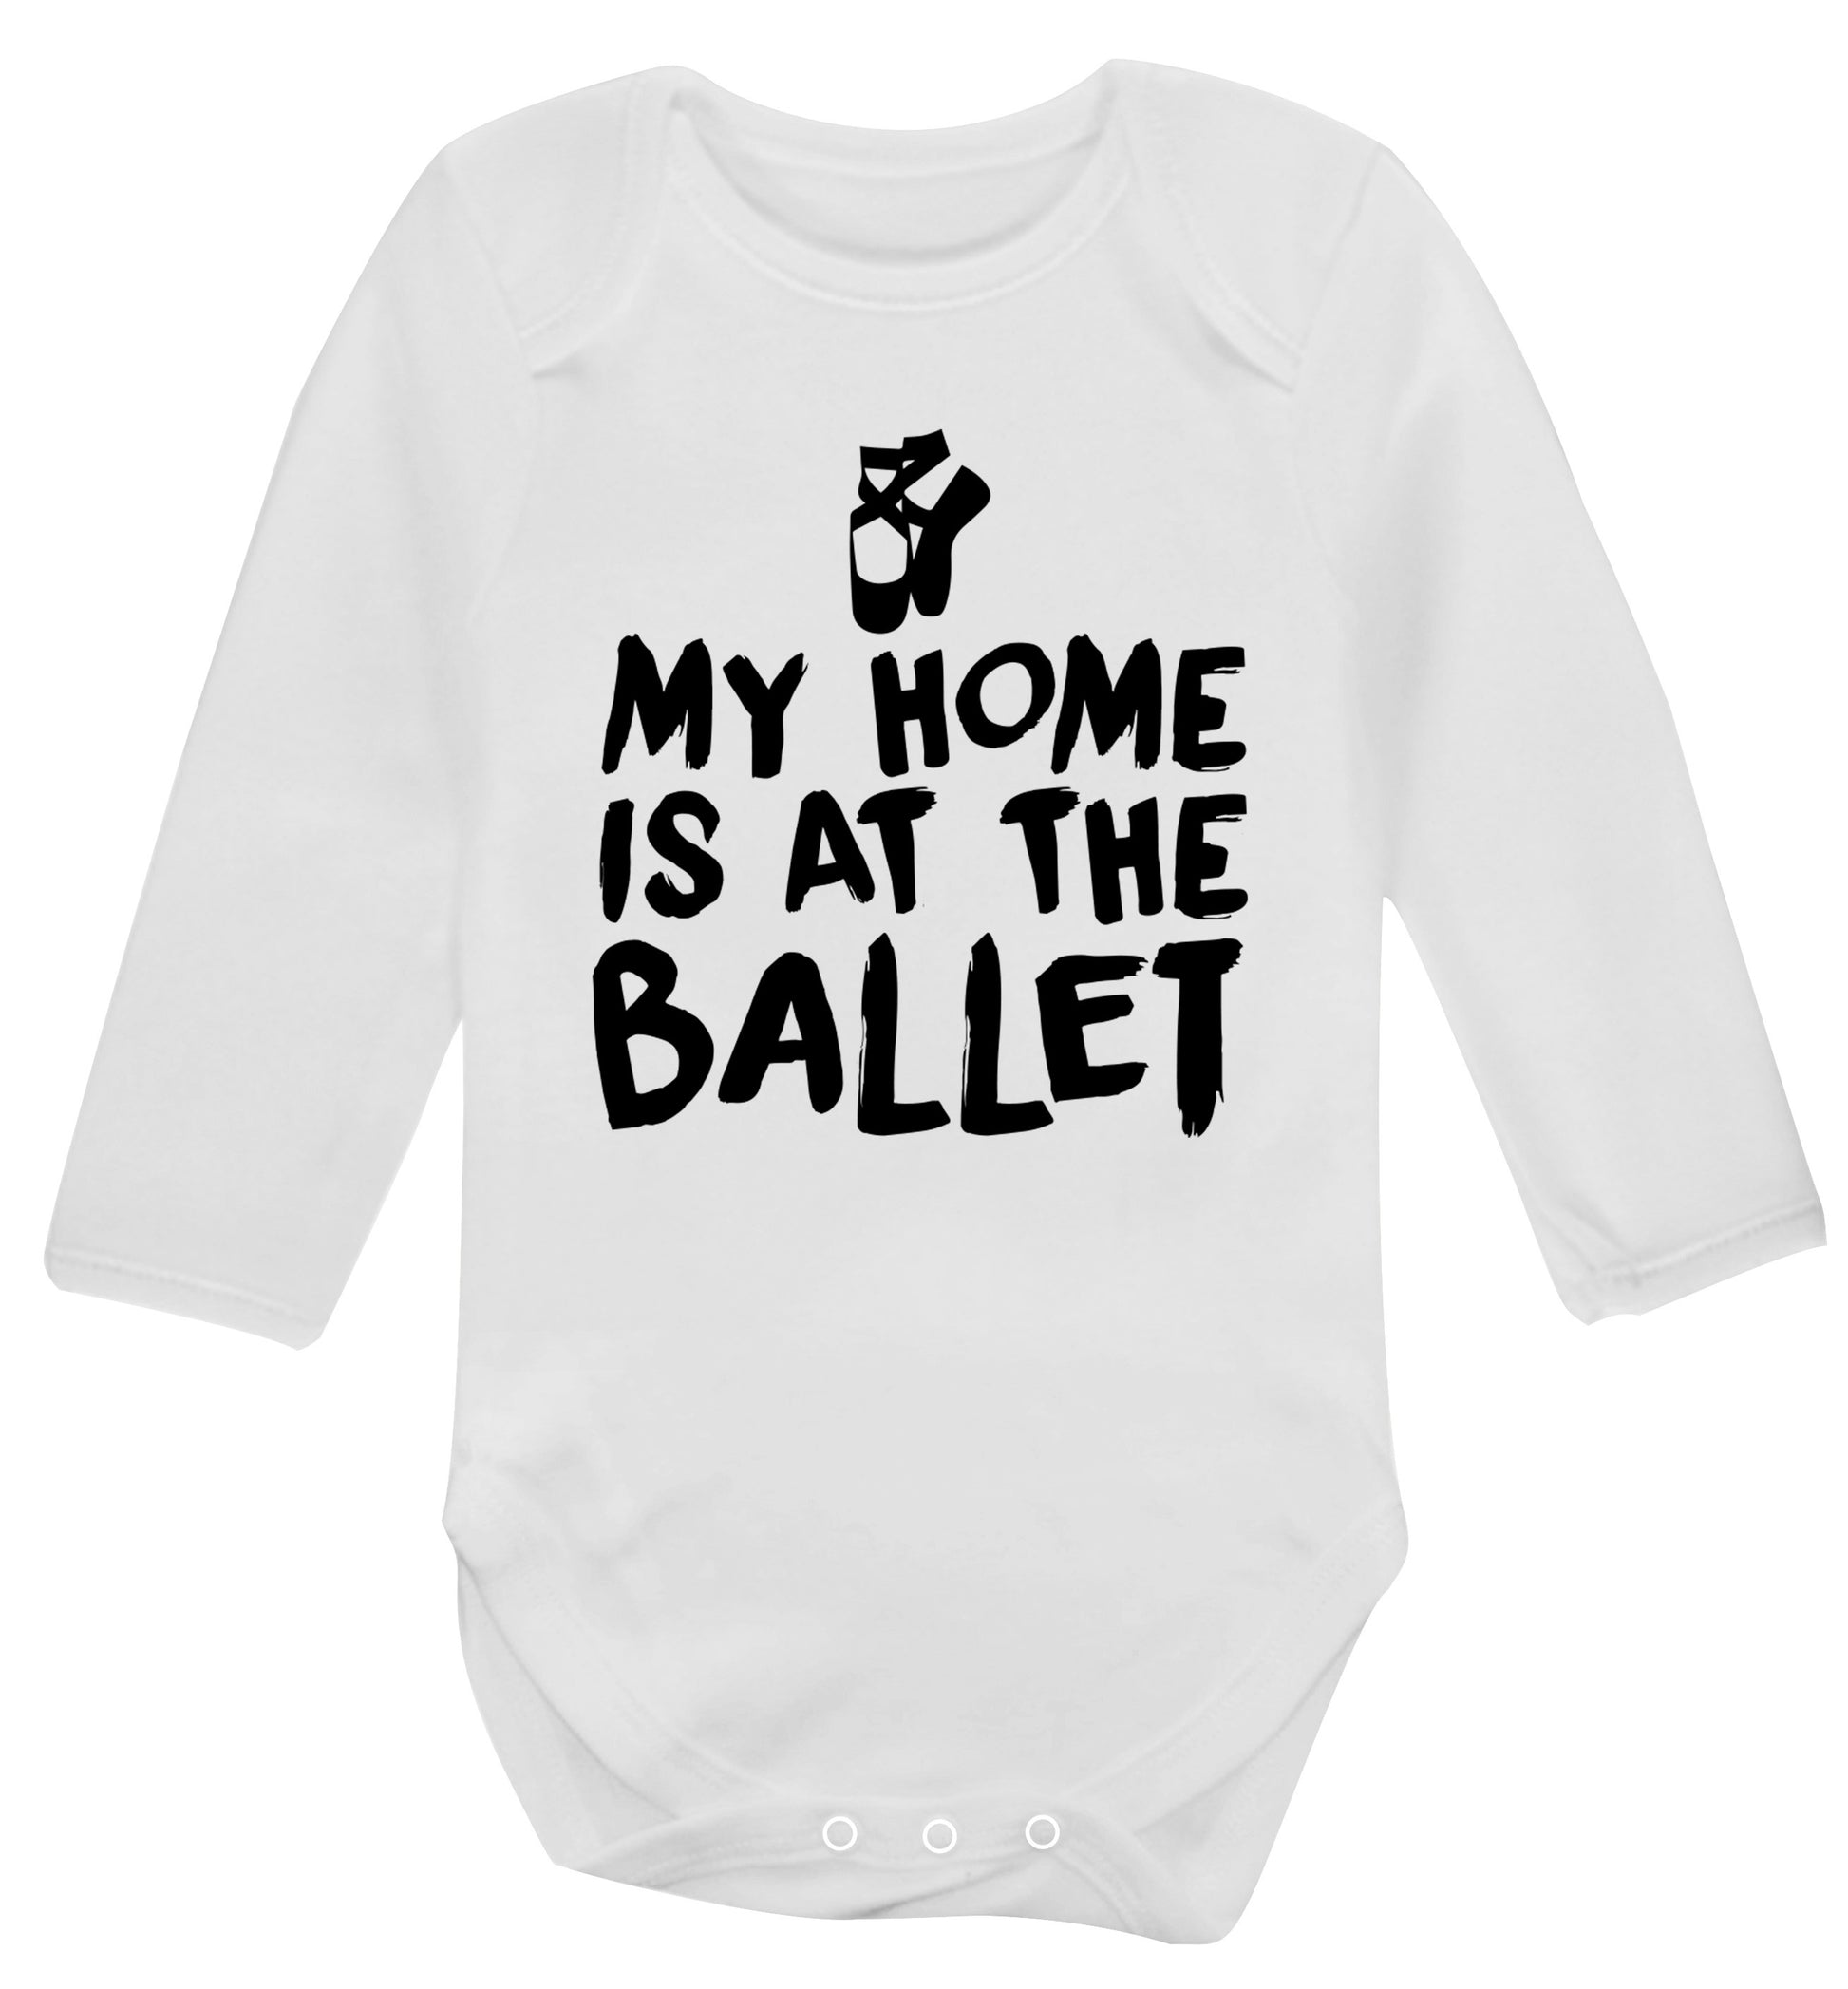 My home is at the dance studio Baby Vest long sleeved white 6-12 months